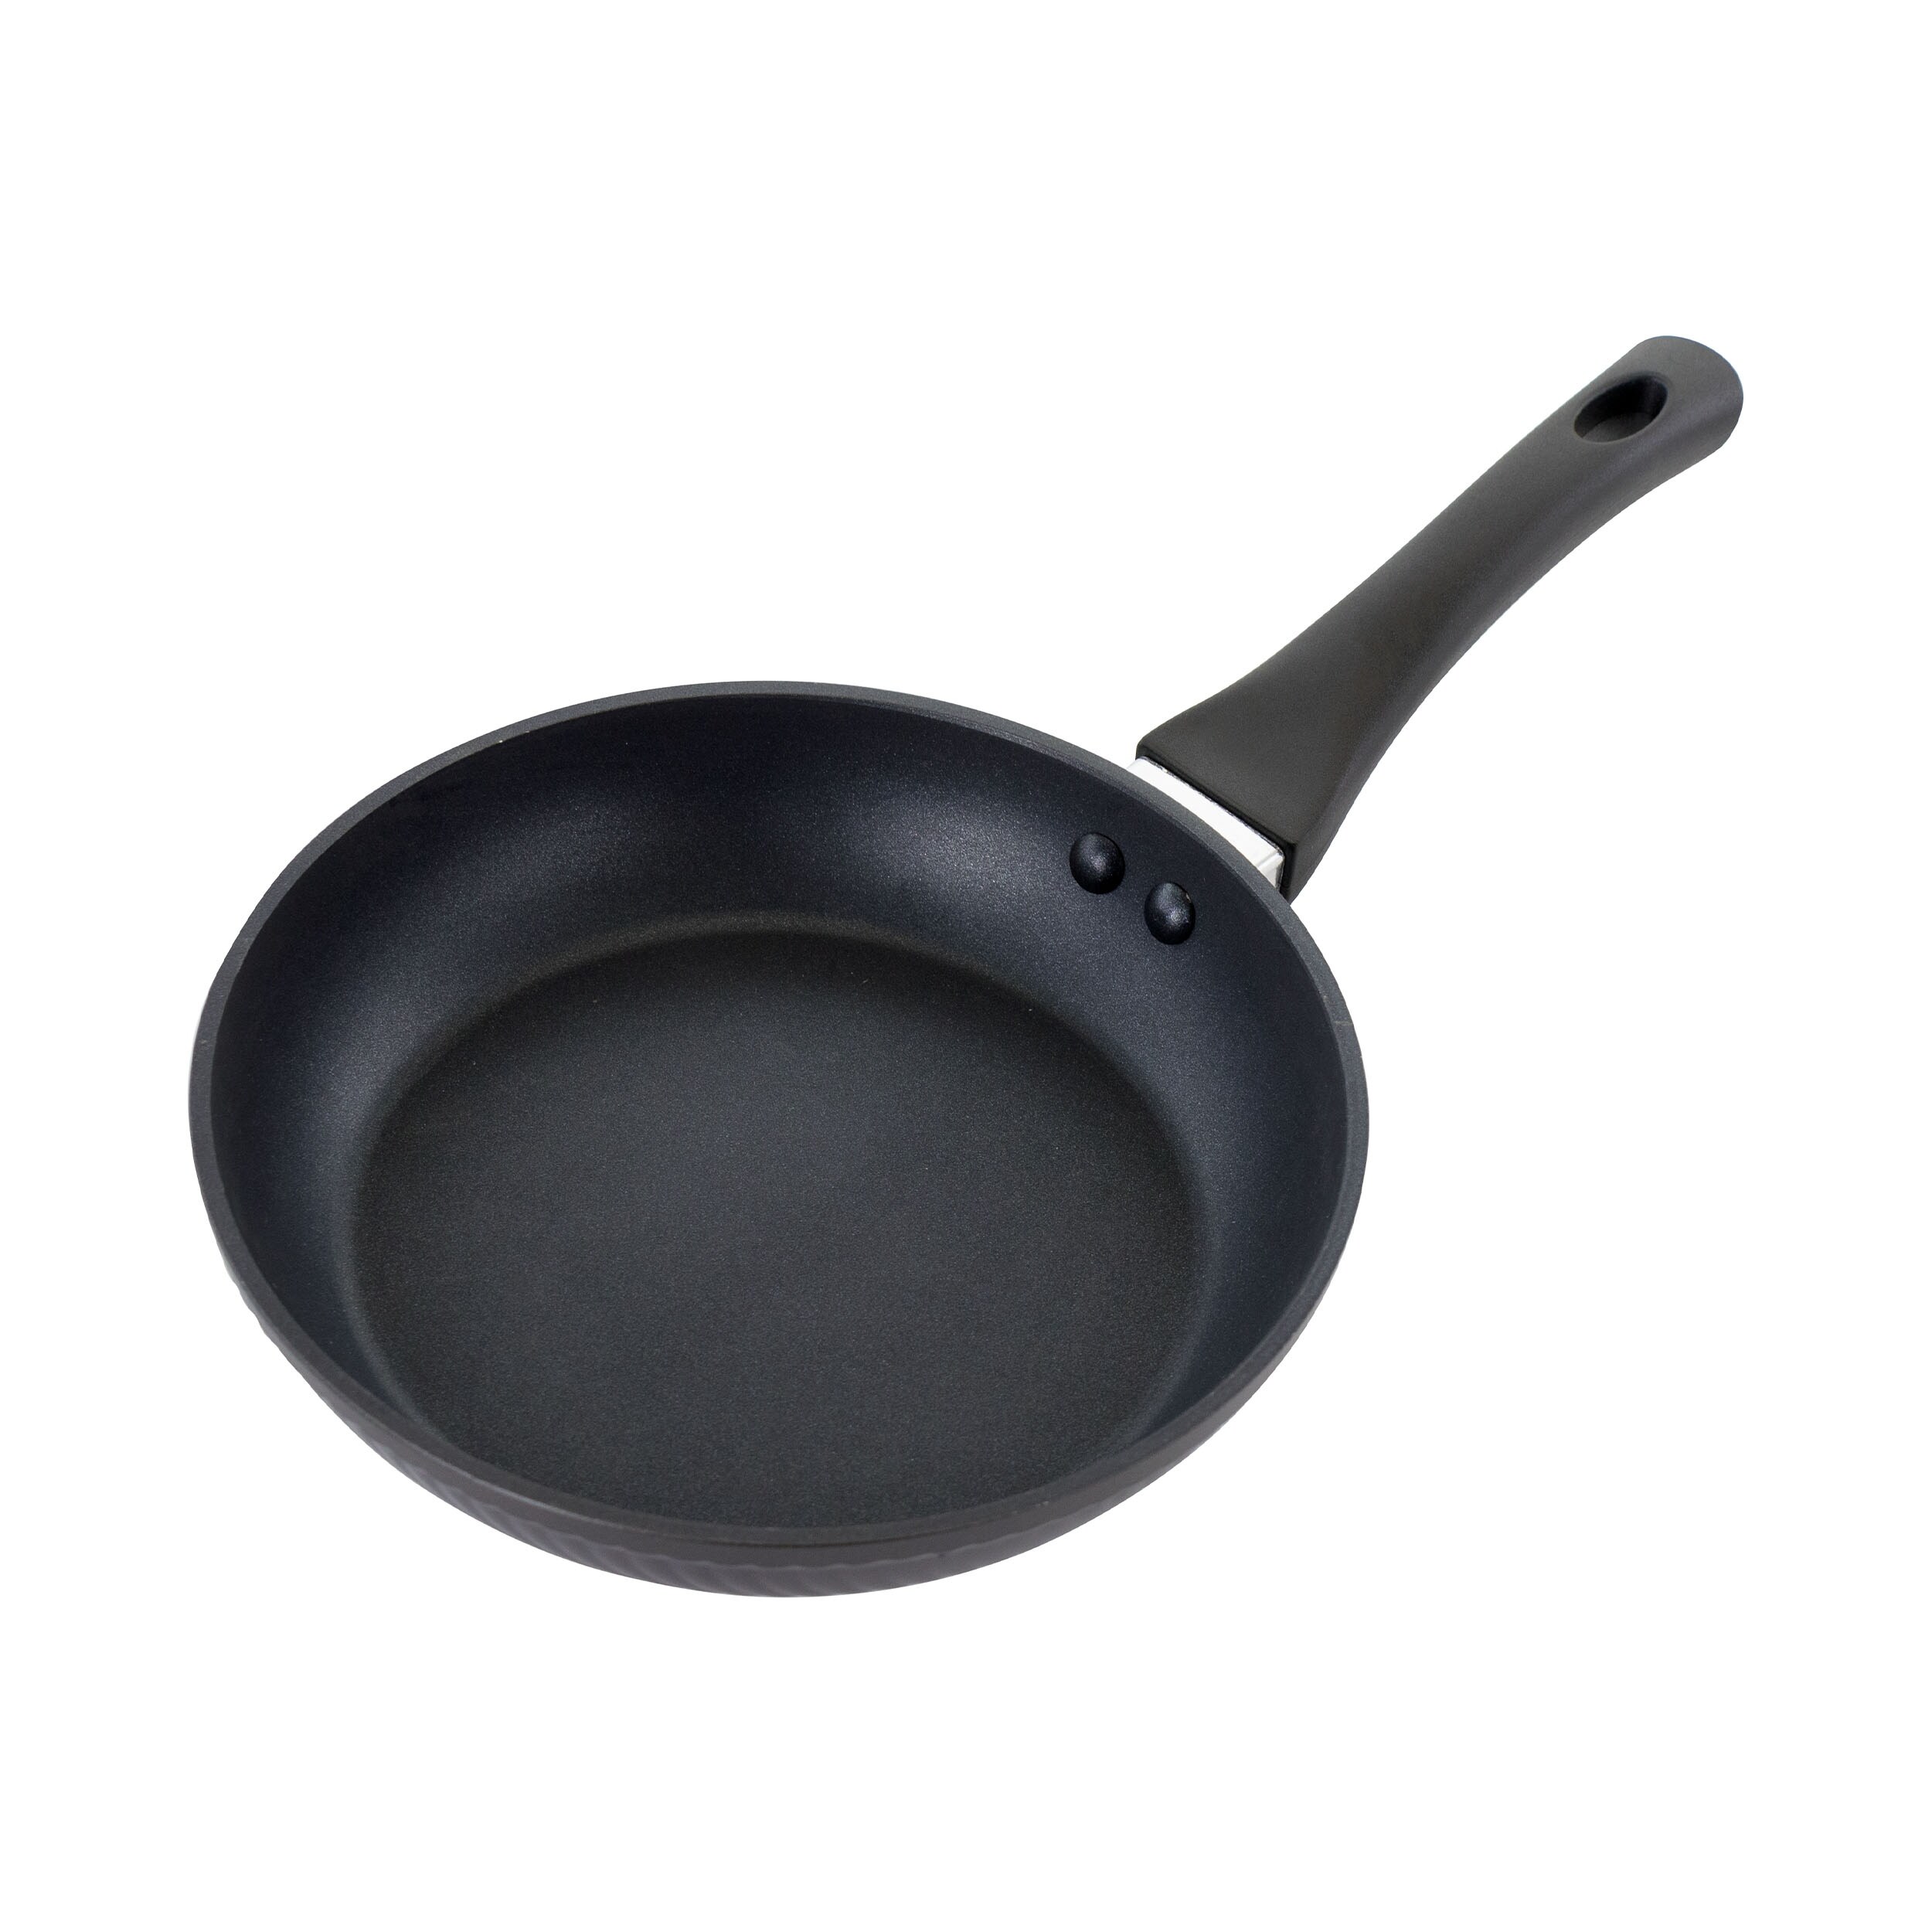 https://ak1.ostkcdn.com/images/products/is/images/direct/bb3acb7ad3aaab2abfbc4400a8313e5f31b29149/Oster-Kono-8-Inch-Aluminum-Nonstick-Frying-Pan-in-Black-with-Bakelite-Handles.jpg